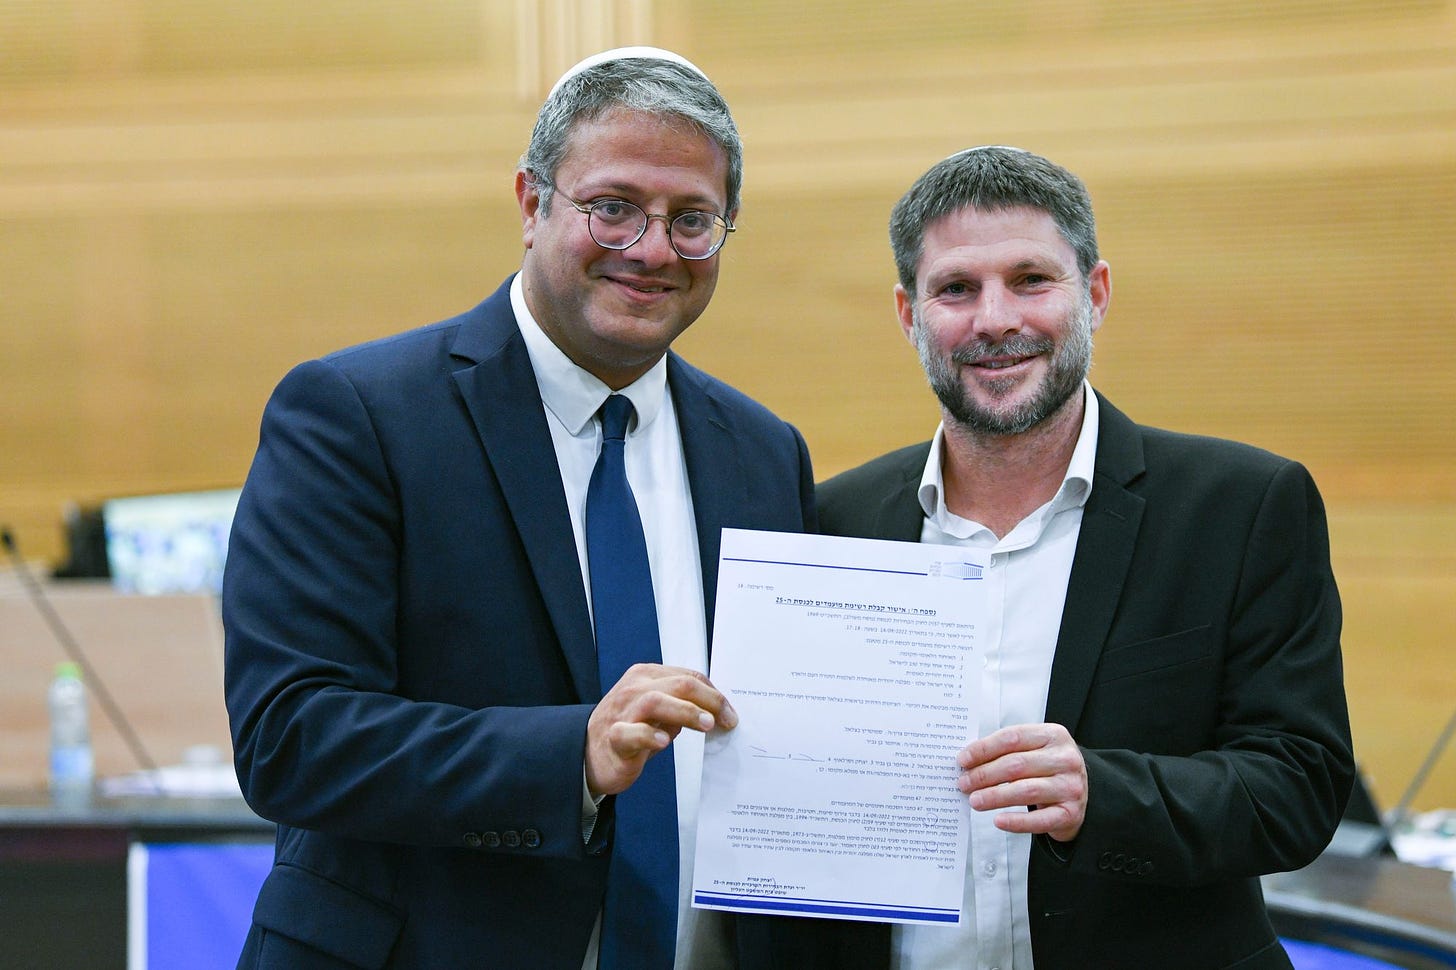 MK Itamar Ben Gvir and MK Bezalel Smotrich registering their party at the election committee where political parties running for a spot in the upcoming Israeli elections arrive to present their party list at the Knesset, the Israeli parliament, in Jerusalem on September 14, 2022. (Photo by Arie Leib Abrams/Flash90)